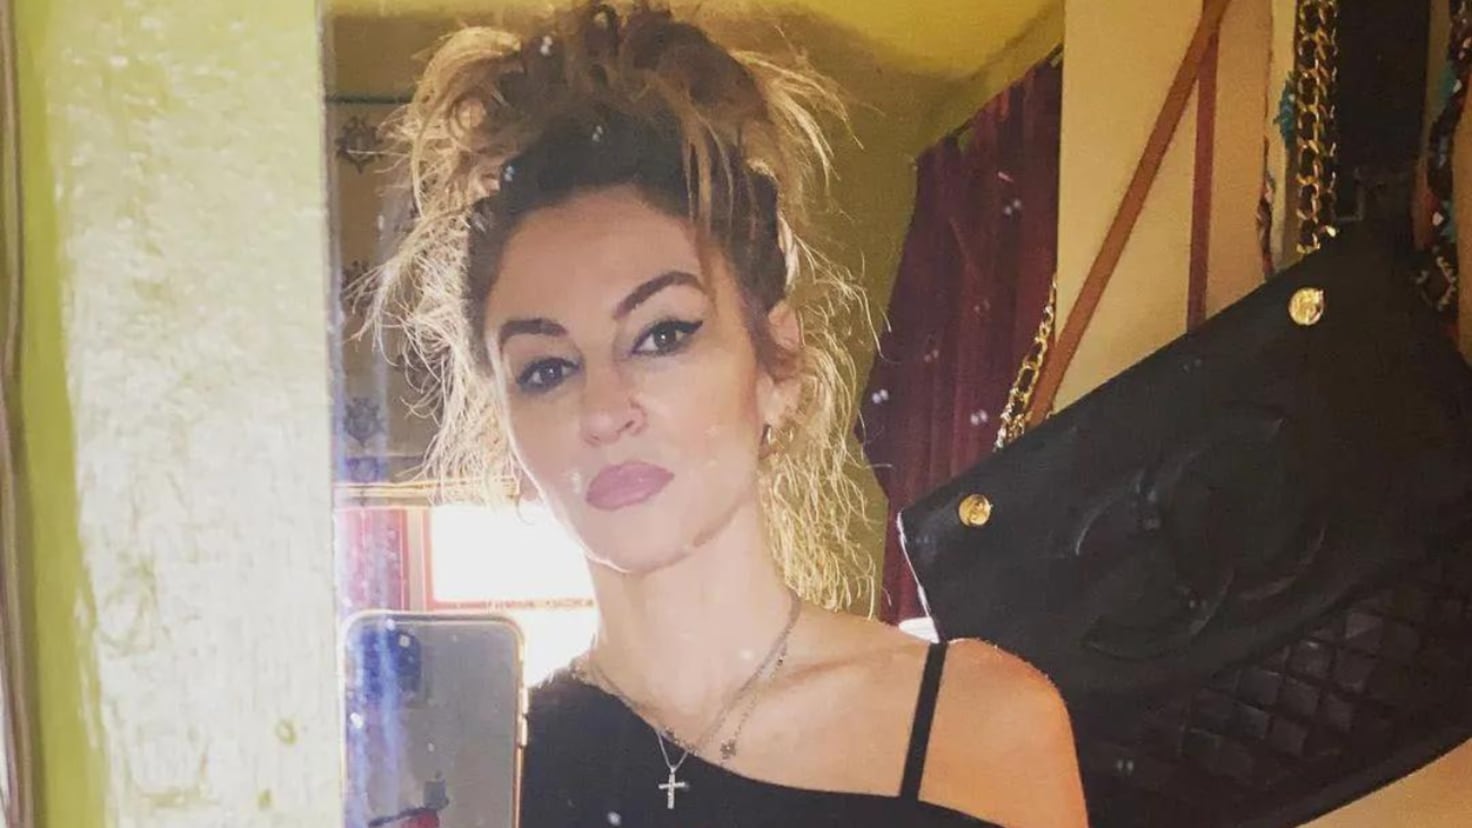 Drea de Matteo reveals that her 13-year-old son edits her content on OnlyFans